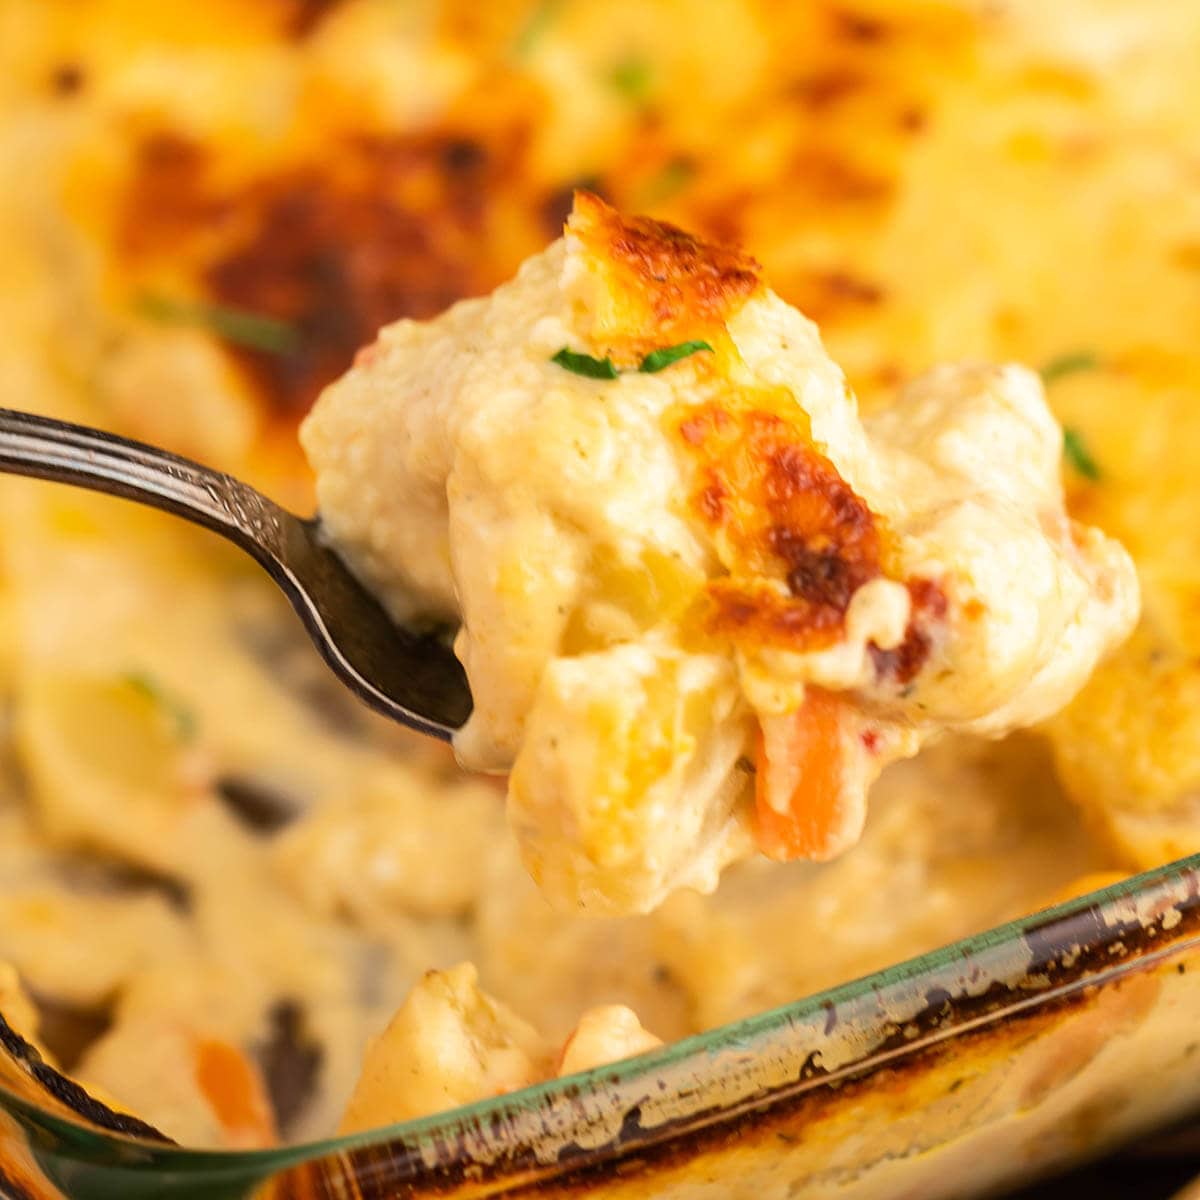 Spoon dishing up Creamy Chicken and potato bake recipe. Casserole dish in is the background. 